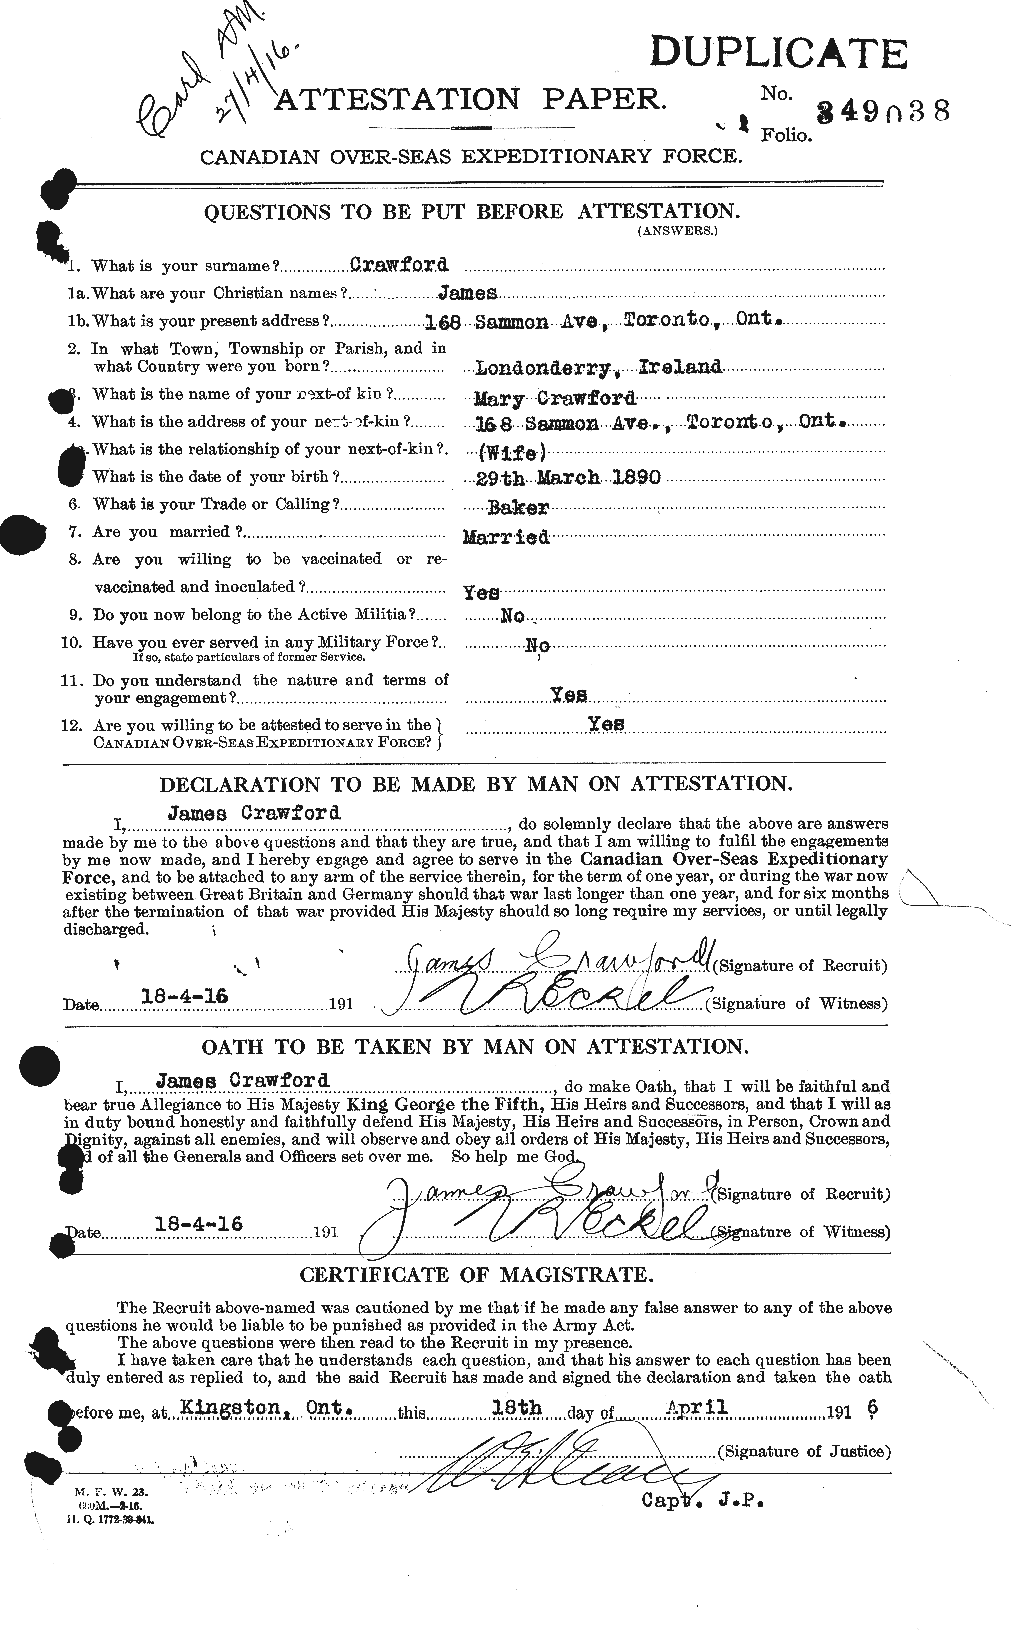 Personnel Records of the First World War - CEF 062772a